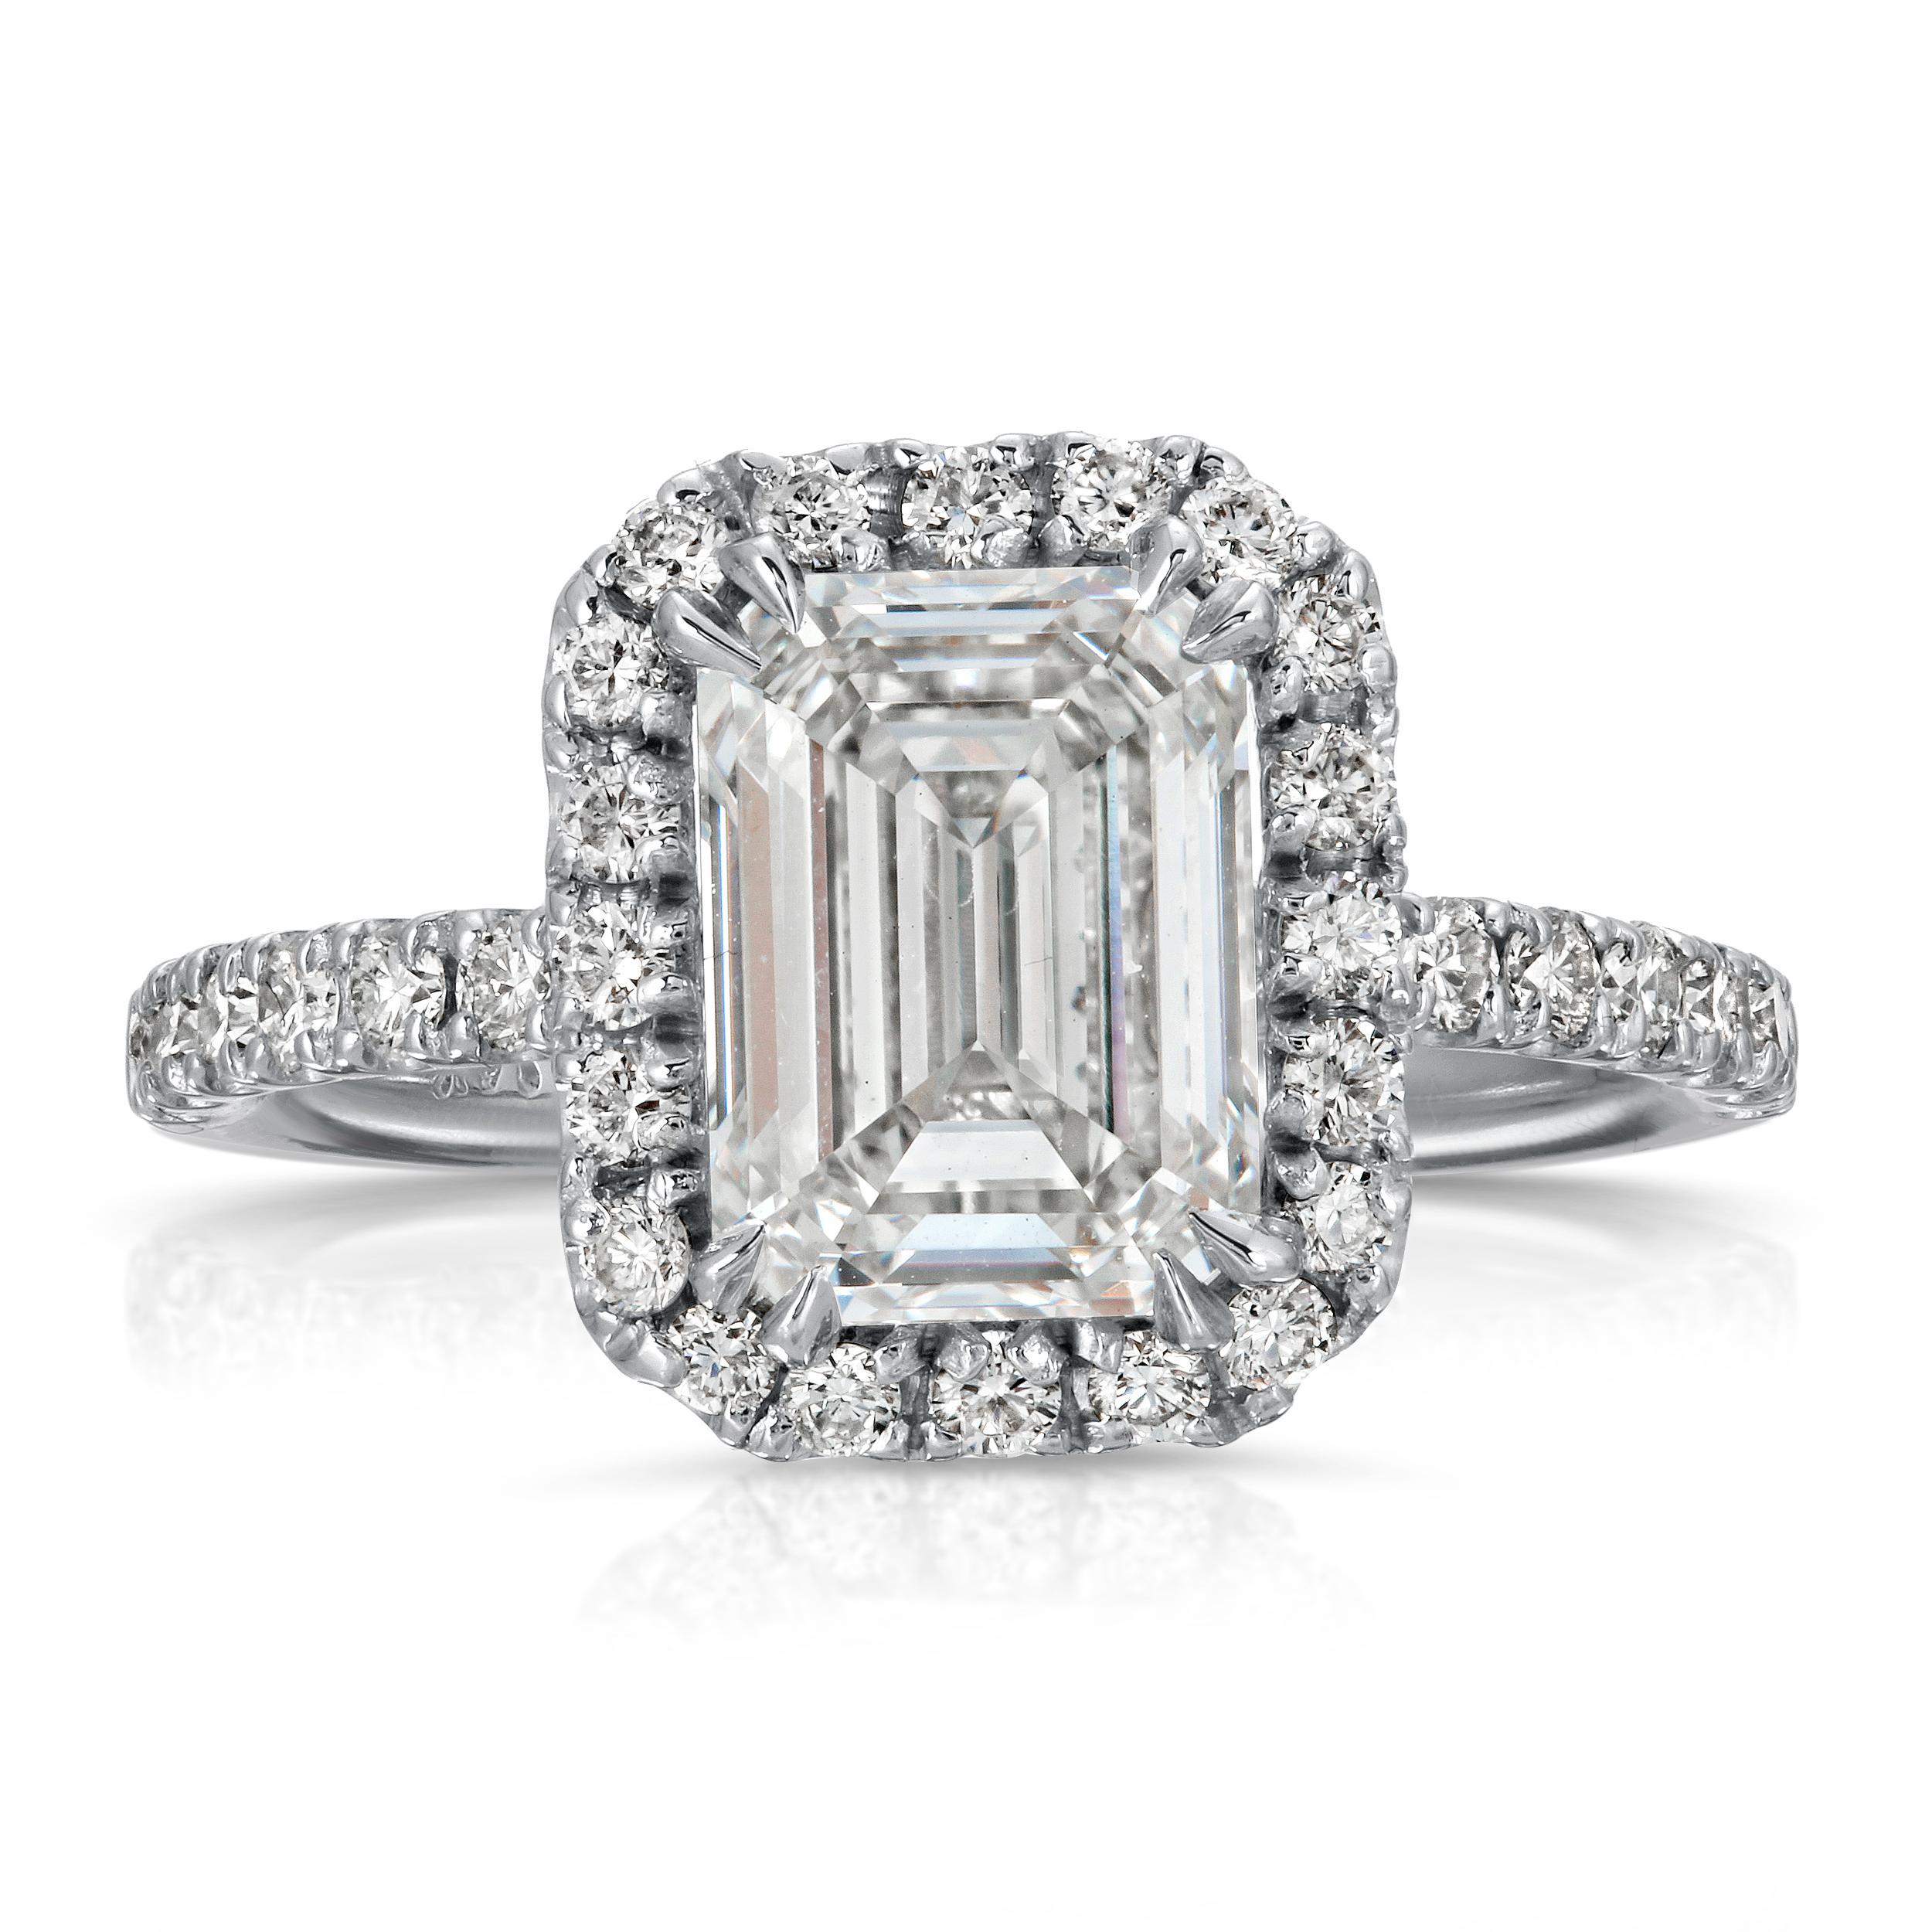 Inspired by Classic Art Deco style and executed this diamond engagement ring will take your breath away. The center diamond is mounted in handmade design of halo diamonds and embraced by pave set diamonds on the undersides of the ring.
Jewel